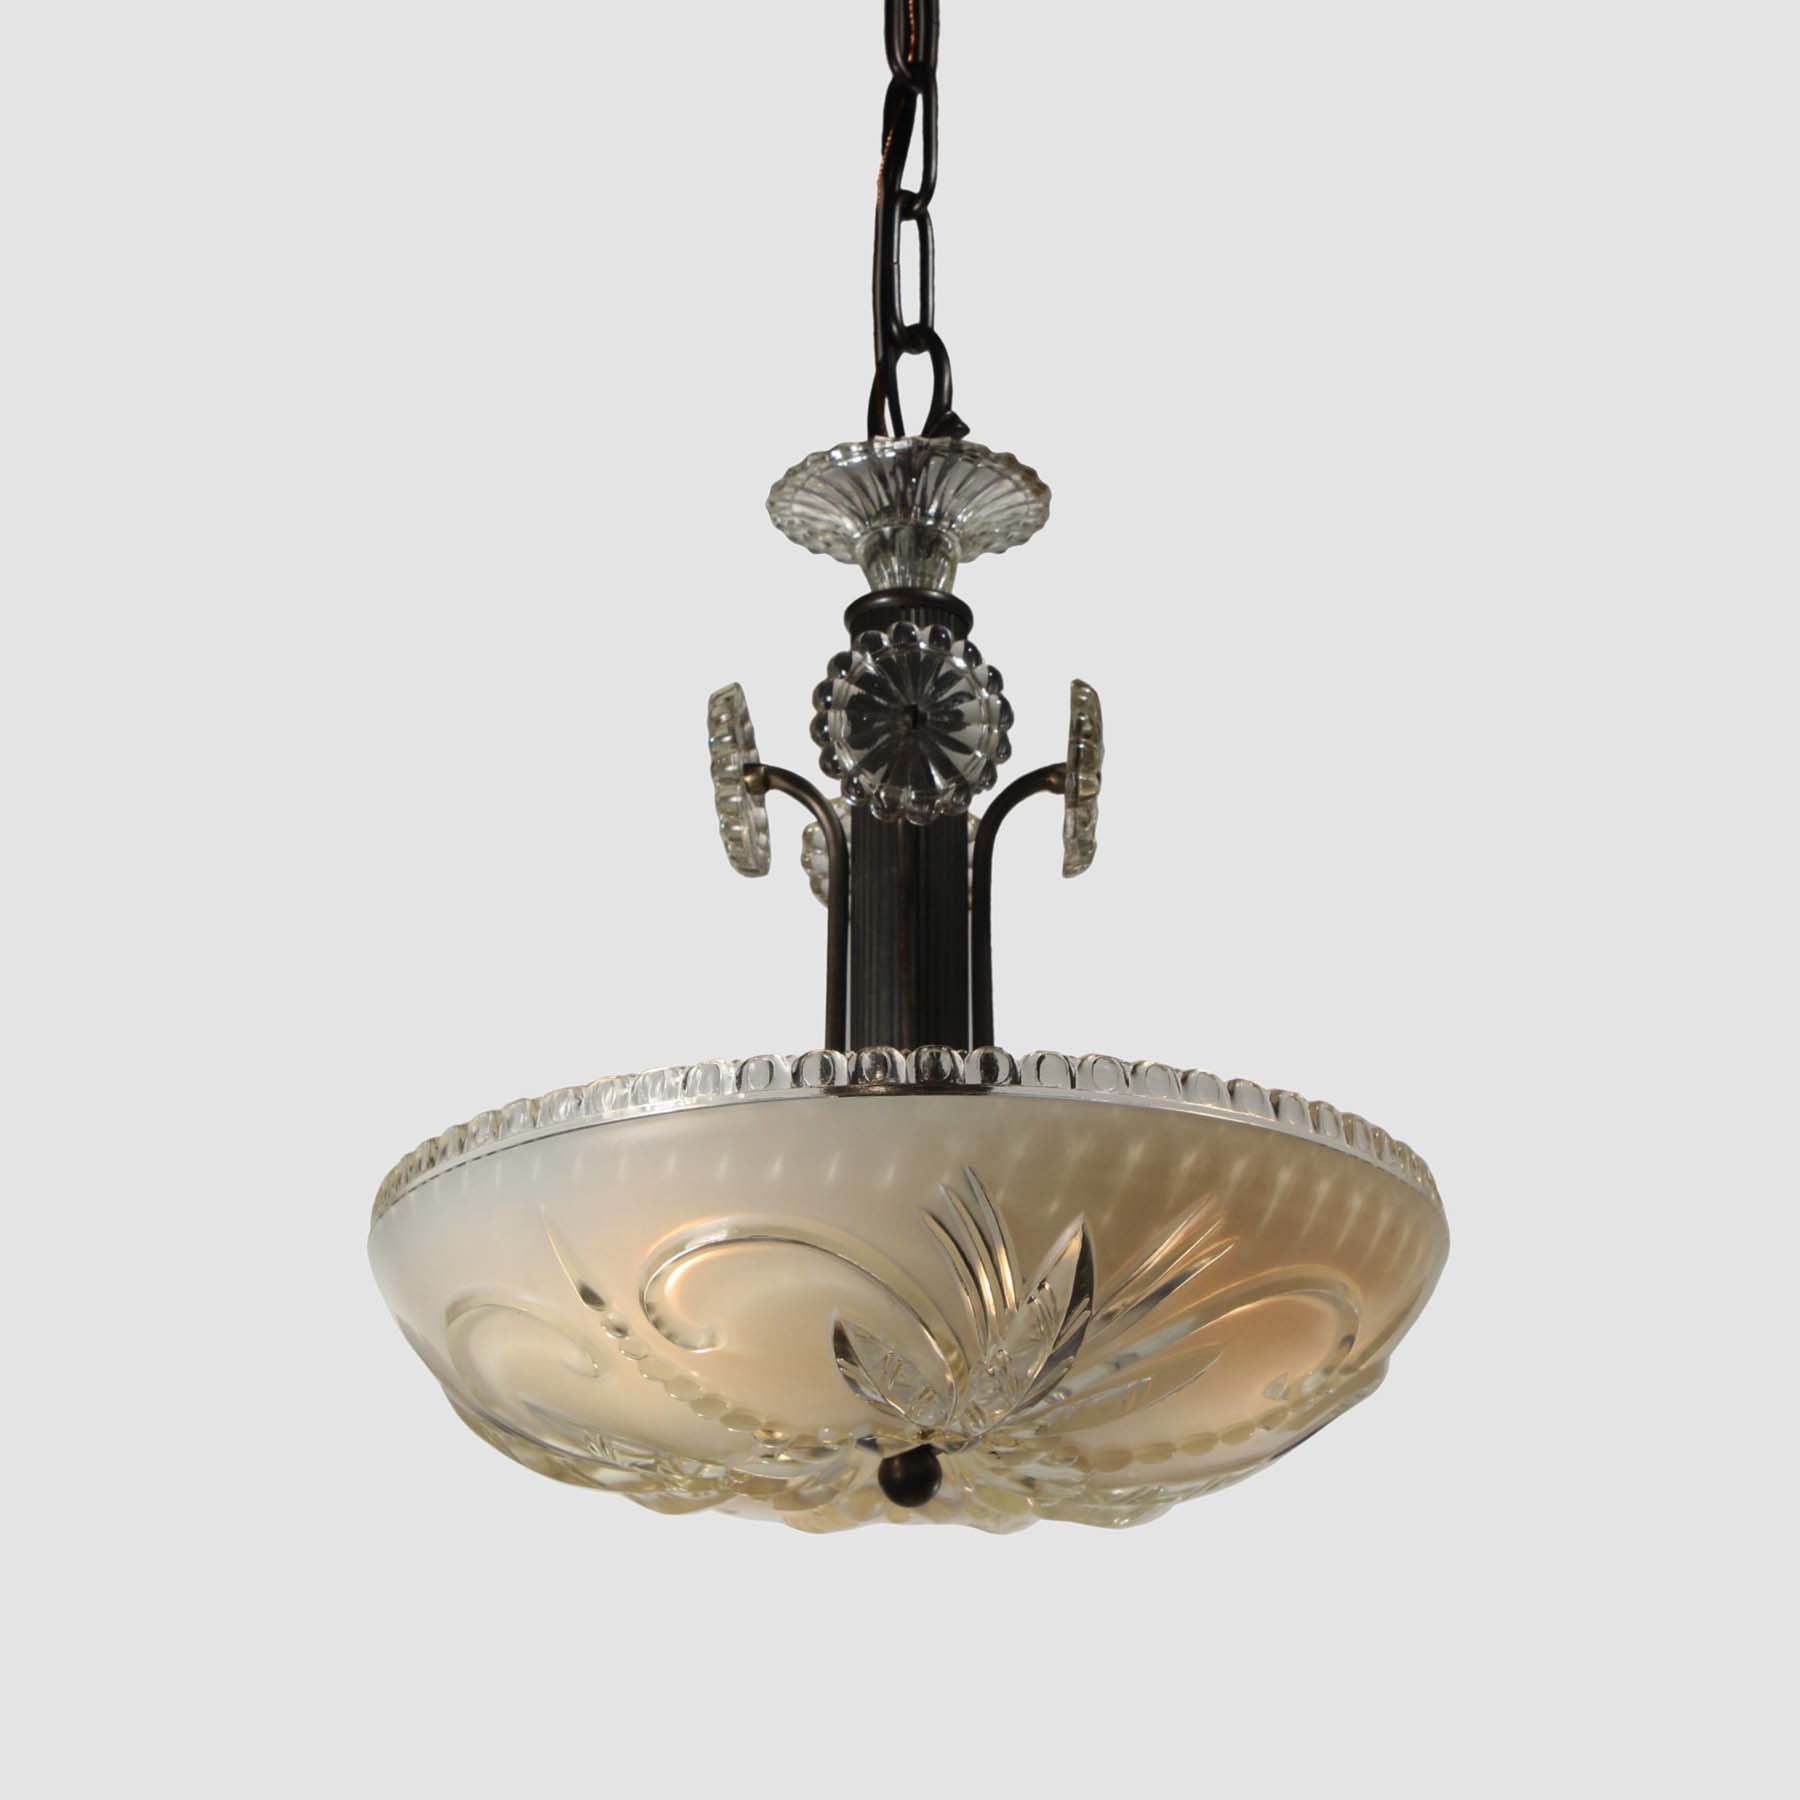 SOLD Vintage Pendant Light with Glass Shade, c. 1940’s-67534